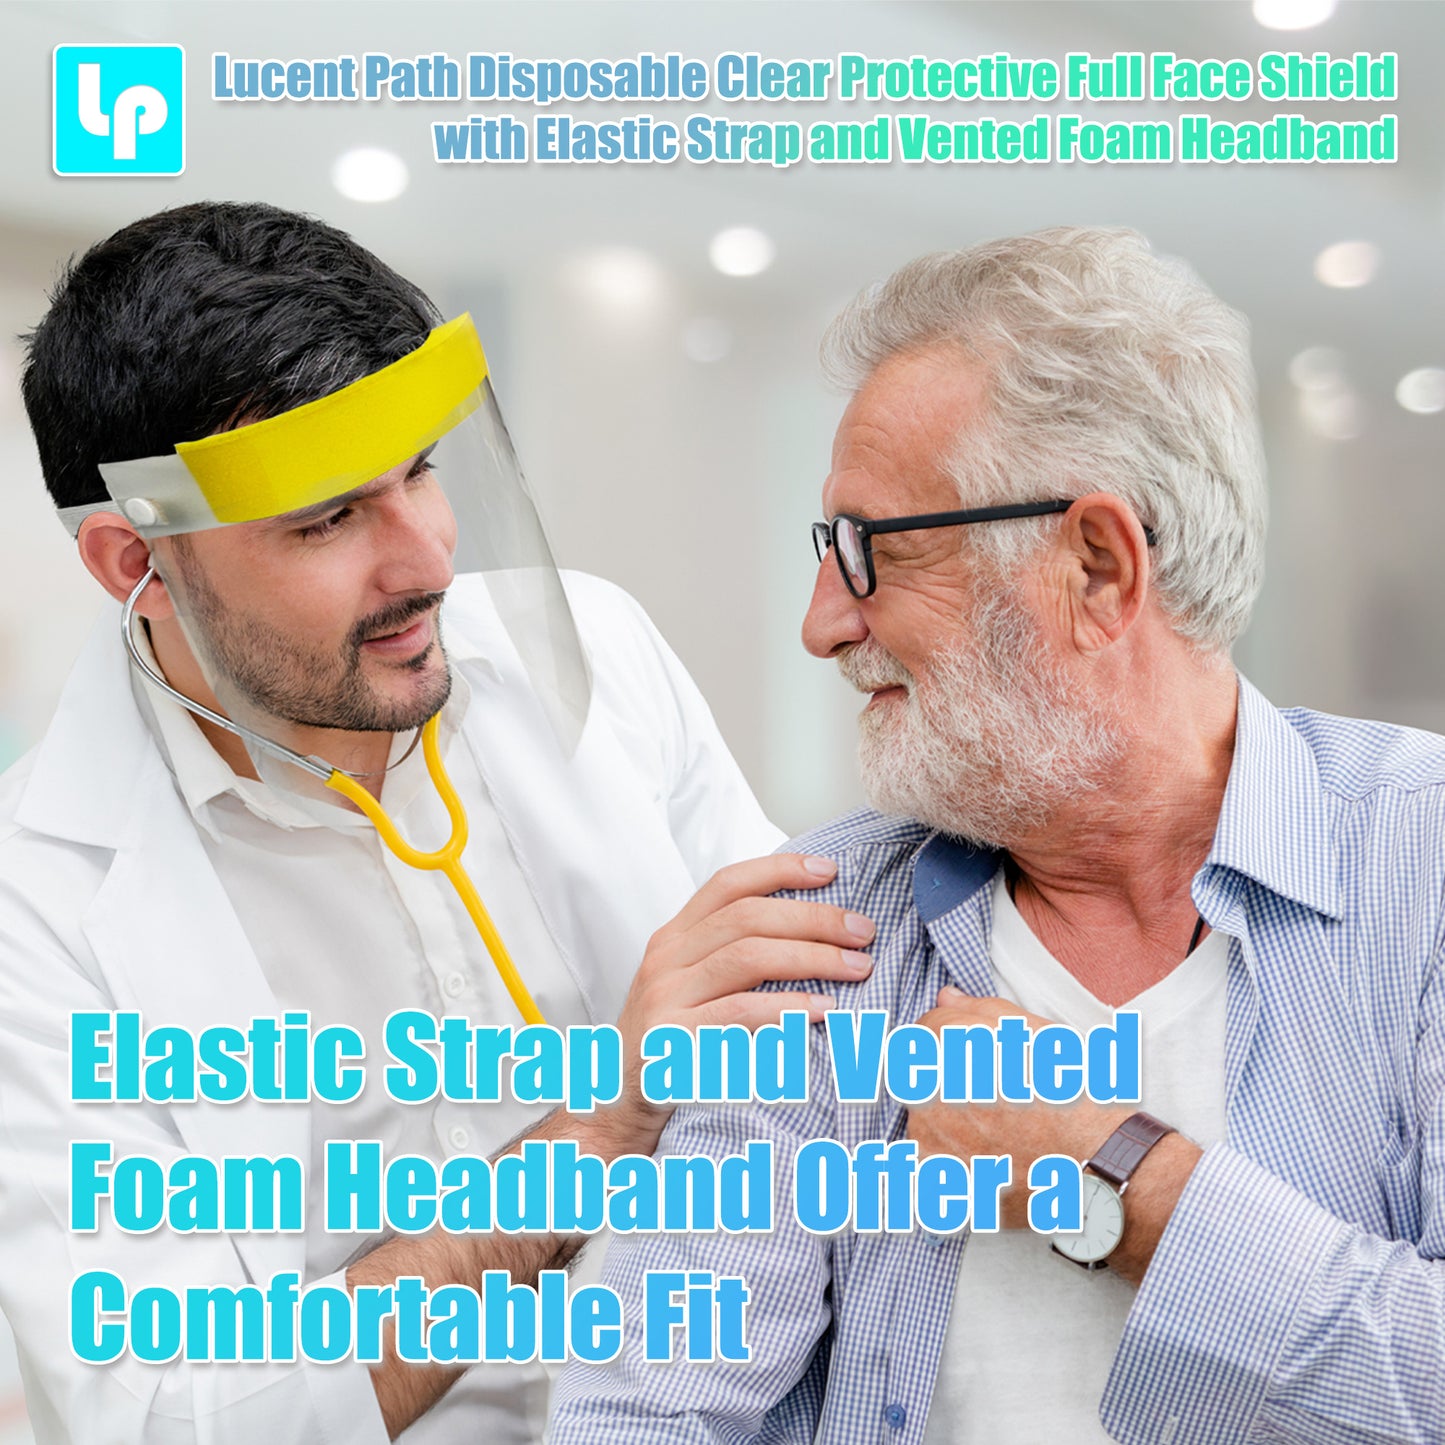 3 packs Lucent Path Disposable Clear Protective Full Face Shield with Elastic Strap and Vented Foam headband